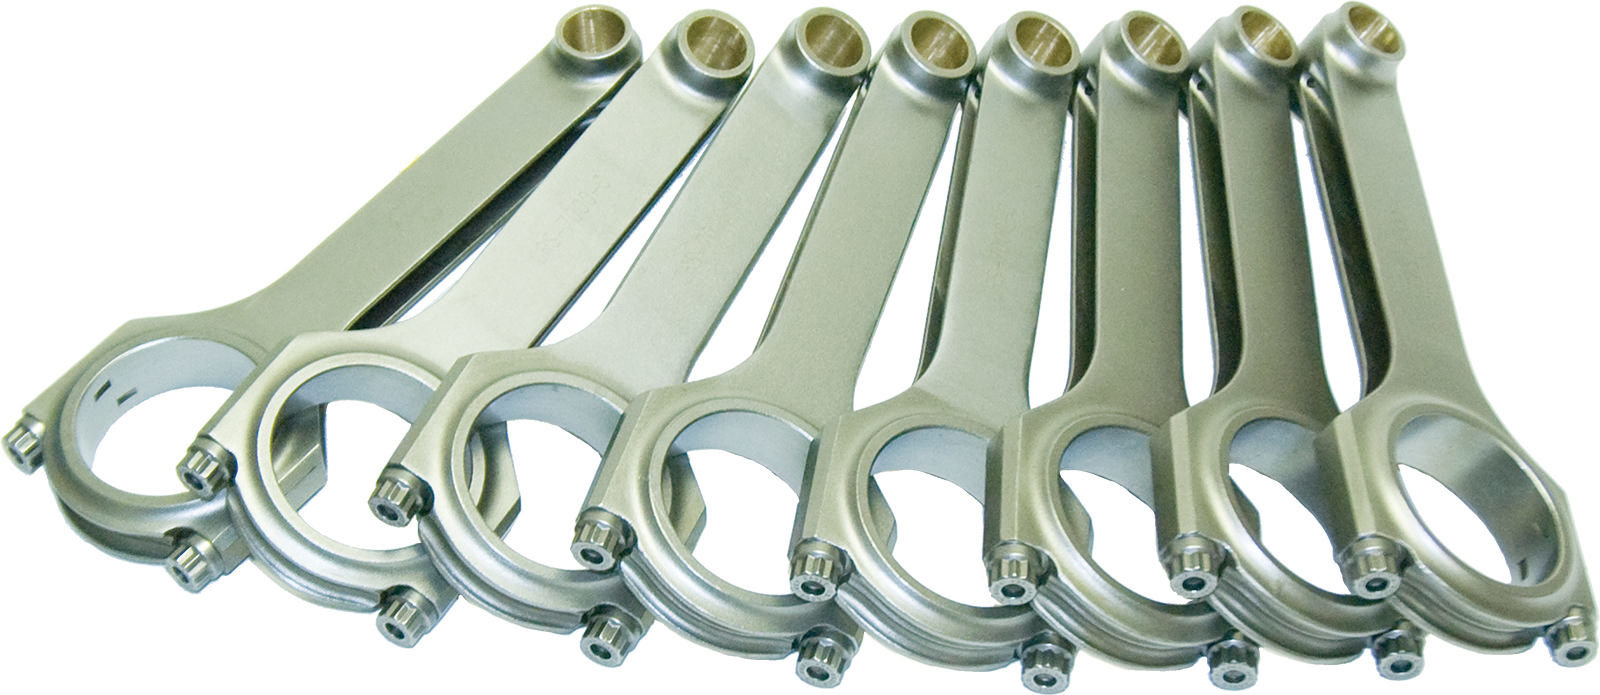 Eagle CRS7000C3D Connecting Rod, H Beam, 7.000 in Long, Bushed, 3/8 in Cap Screws, Forged Steel, Ford Flathead, Set of 8